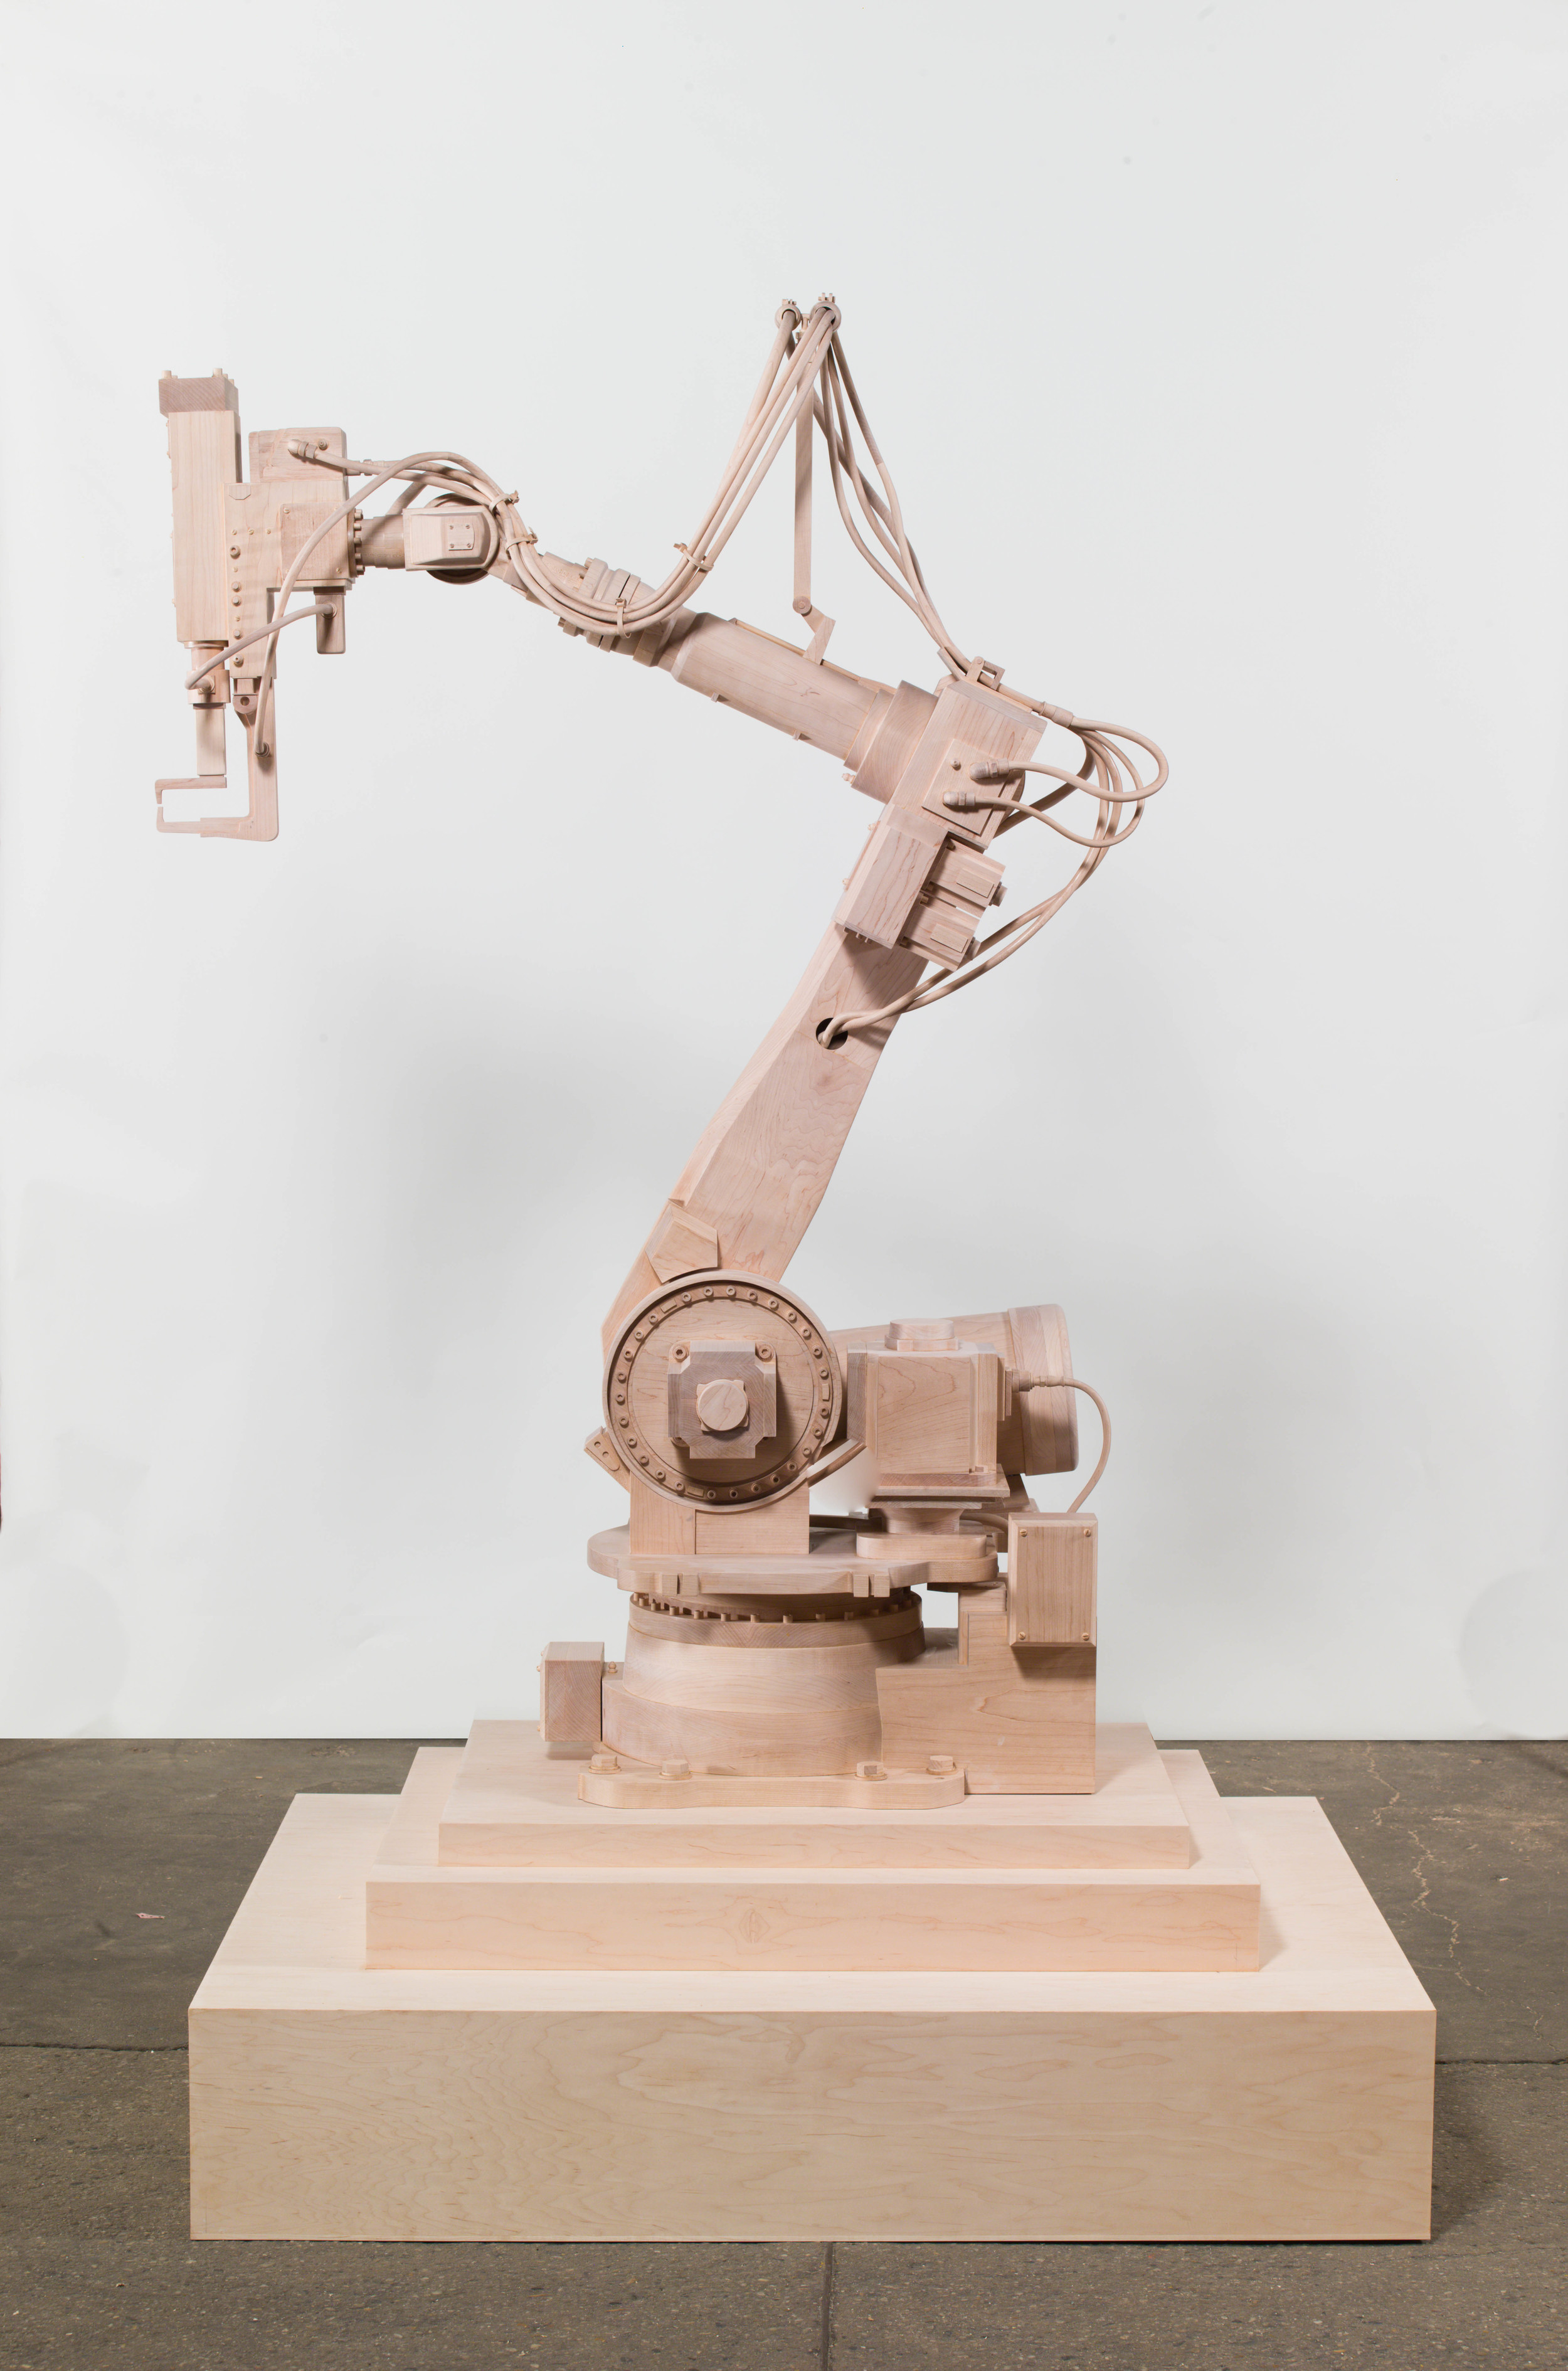  Robot, 2013, Maple wood, 70 x 40 x 24 inches 